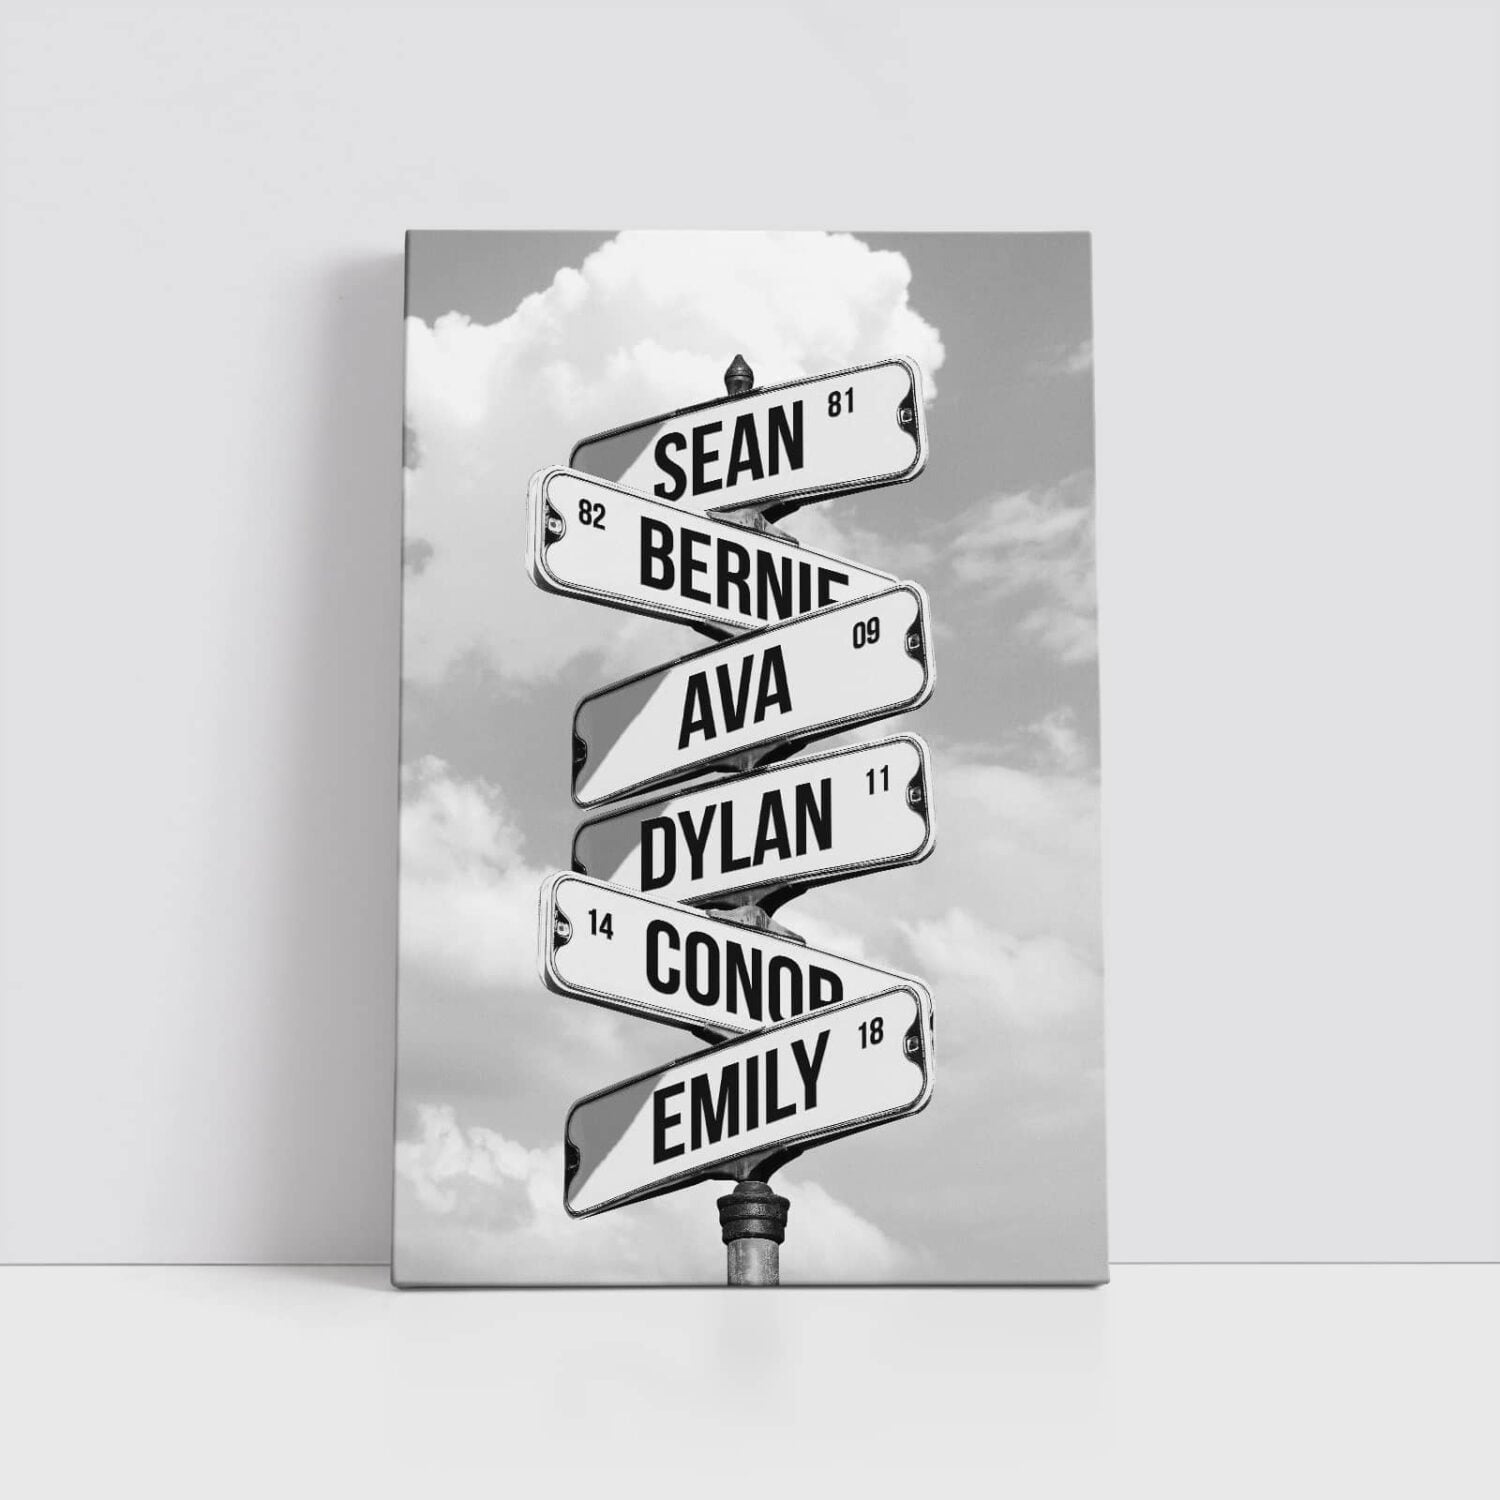 Custom Street Sign featuring Family names